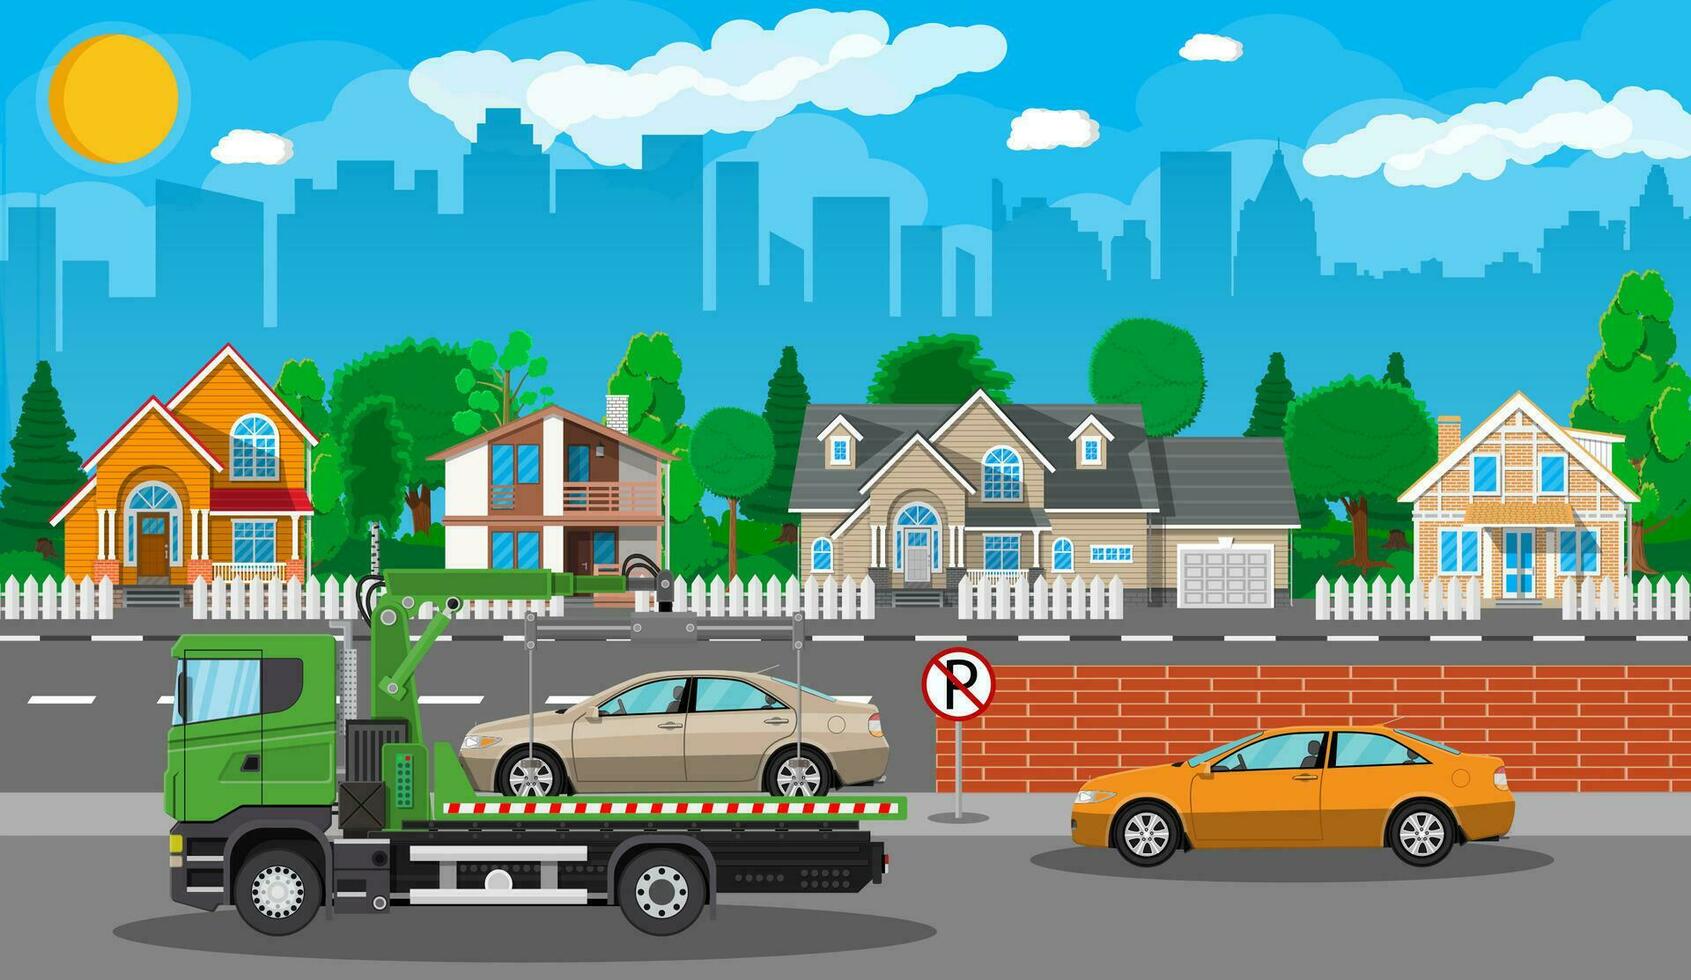 Tow truck takes car. Parking is prohibited. City road side assistance service. Evacuator car vehicle. Cityscape, suburb, house, tree. Road, sky, clouds. Vector illustration in flat style